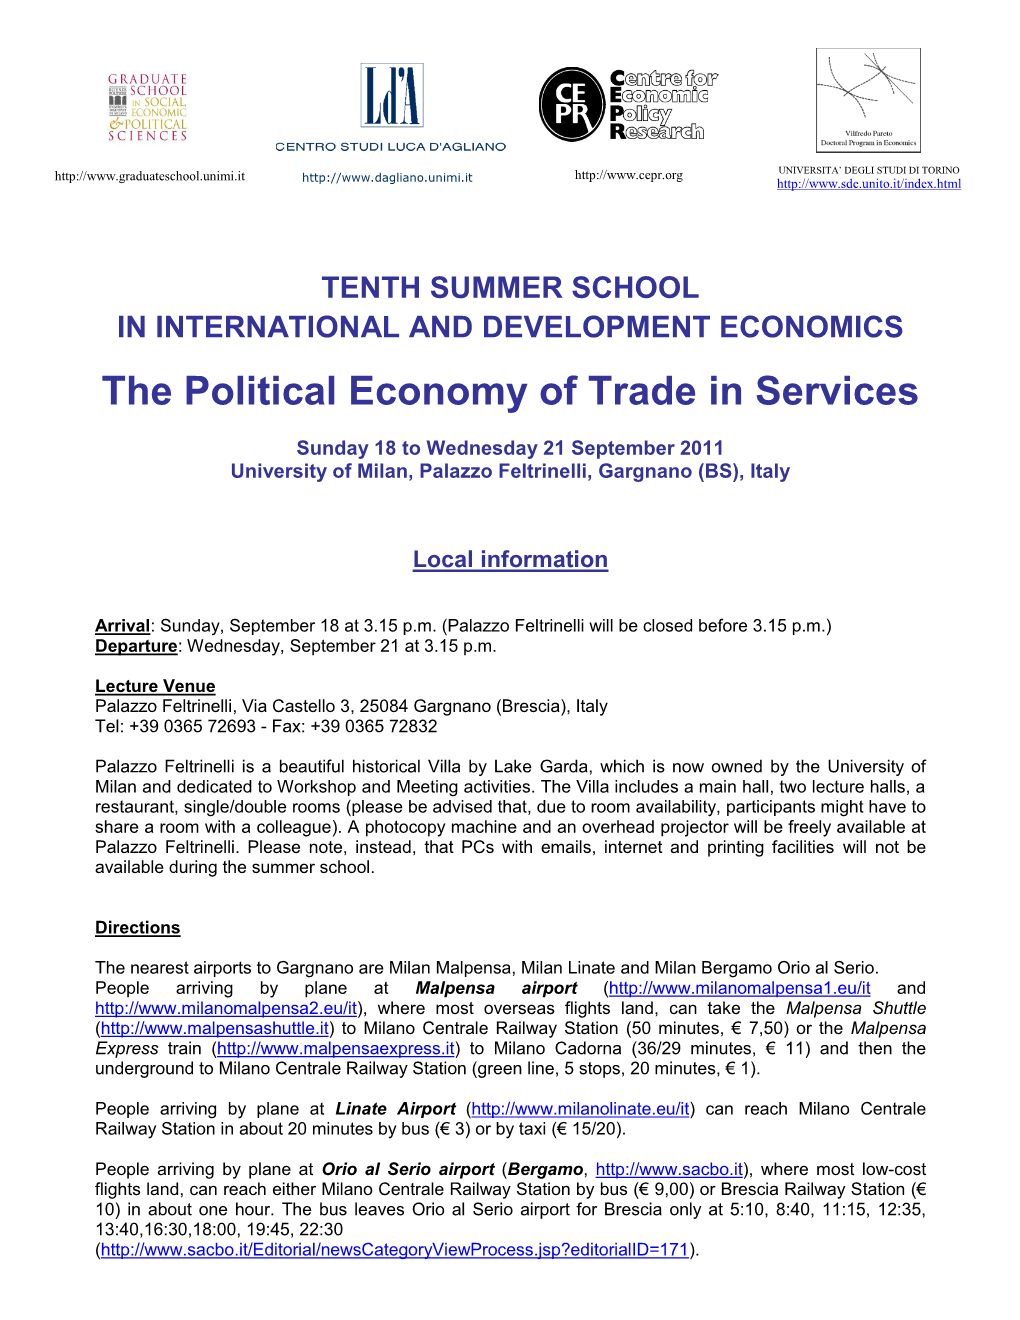 The Political Economy of Trade in Services